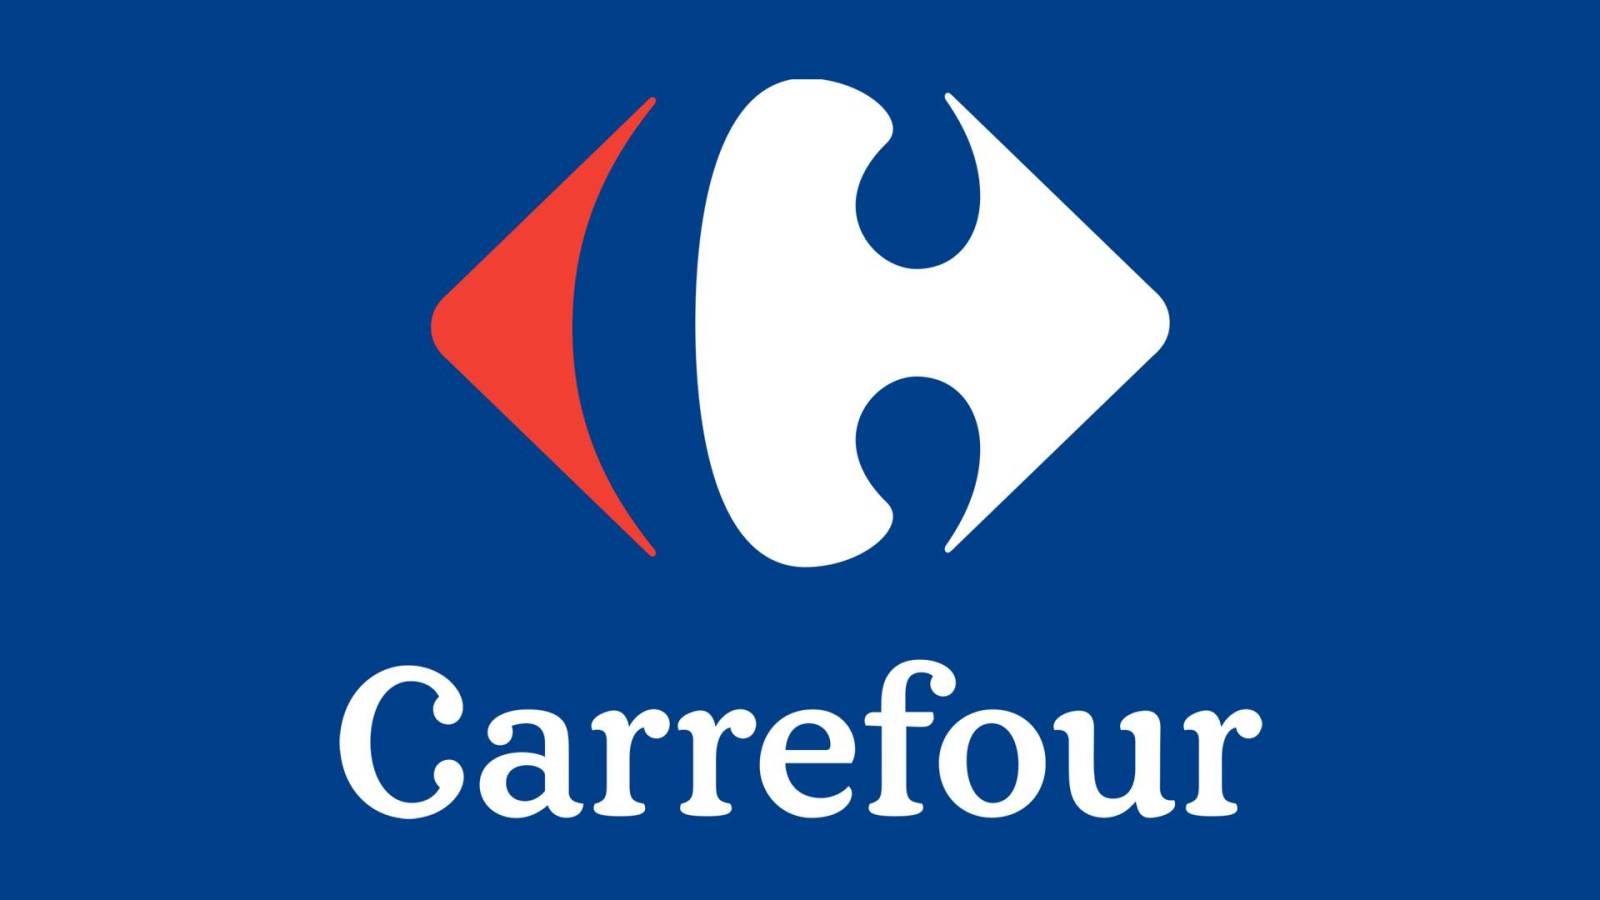 Carrefour noroc